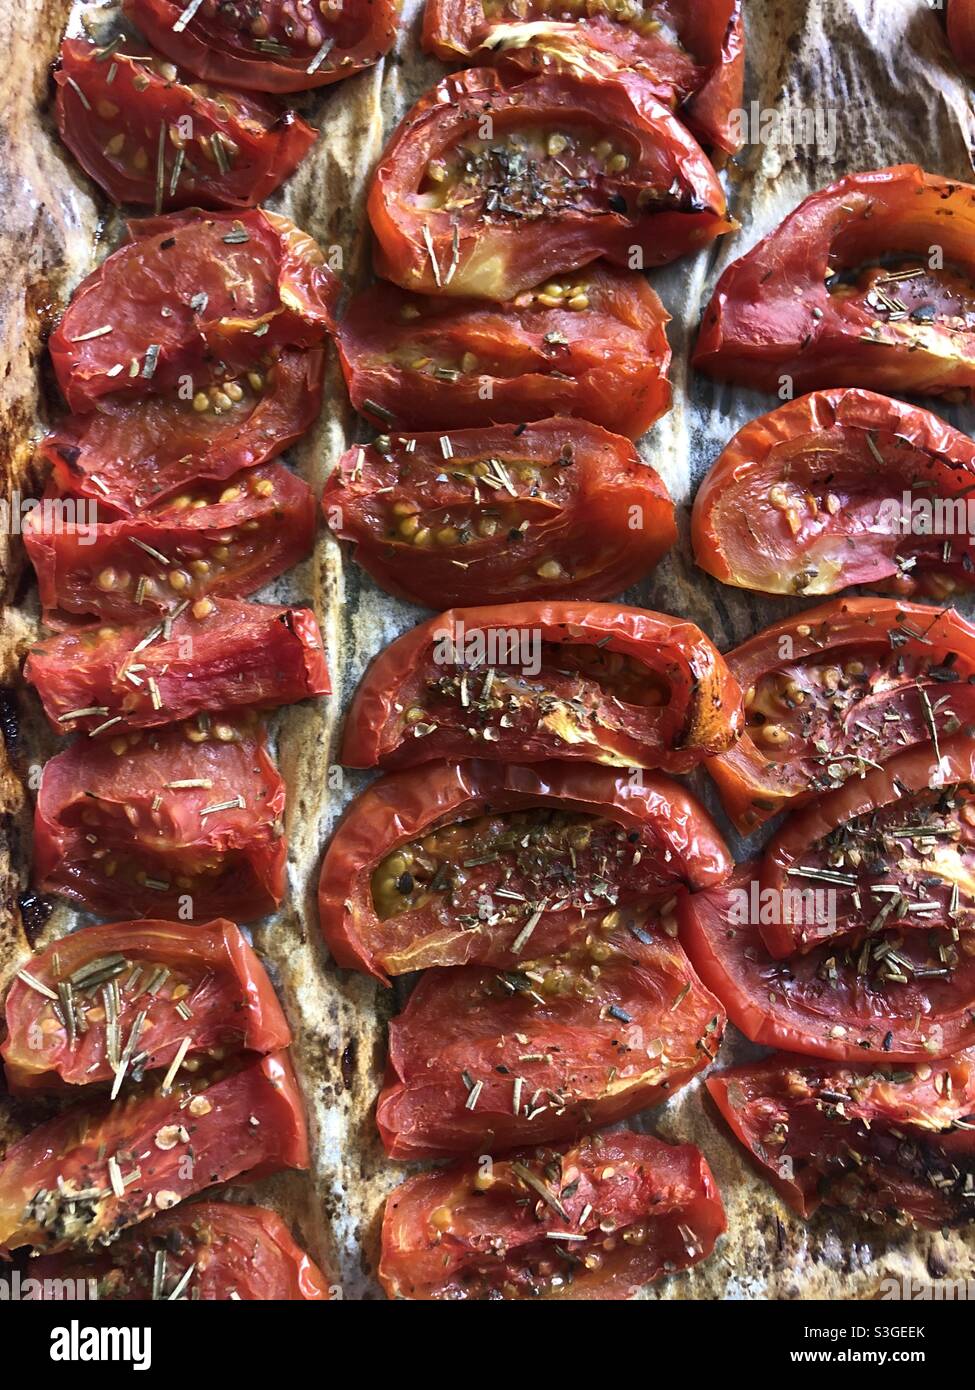 Oven Roasted tomatoes Stock Photo